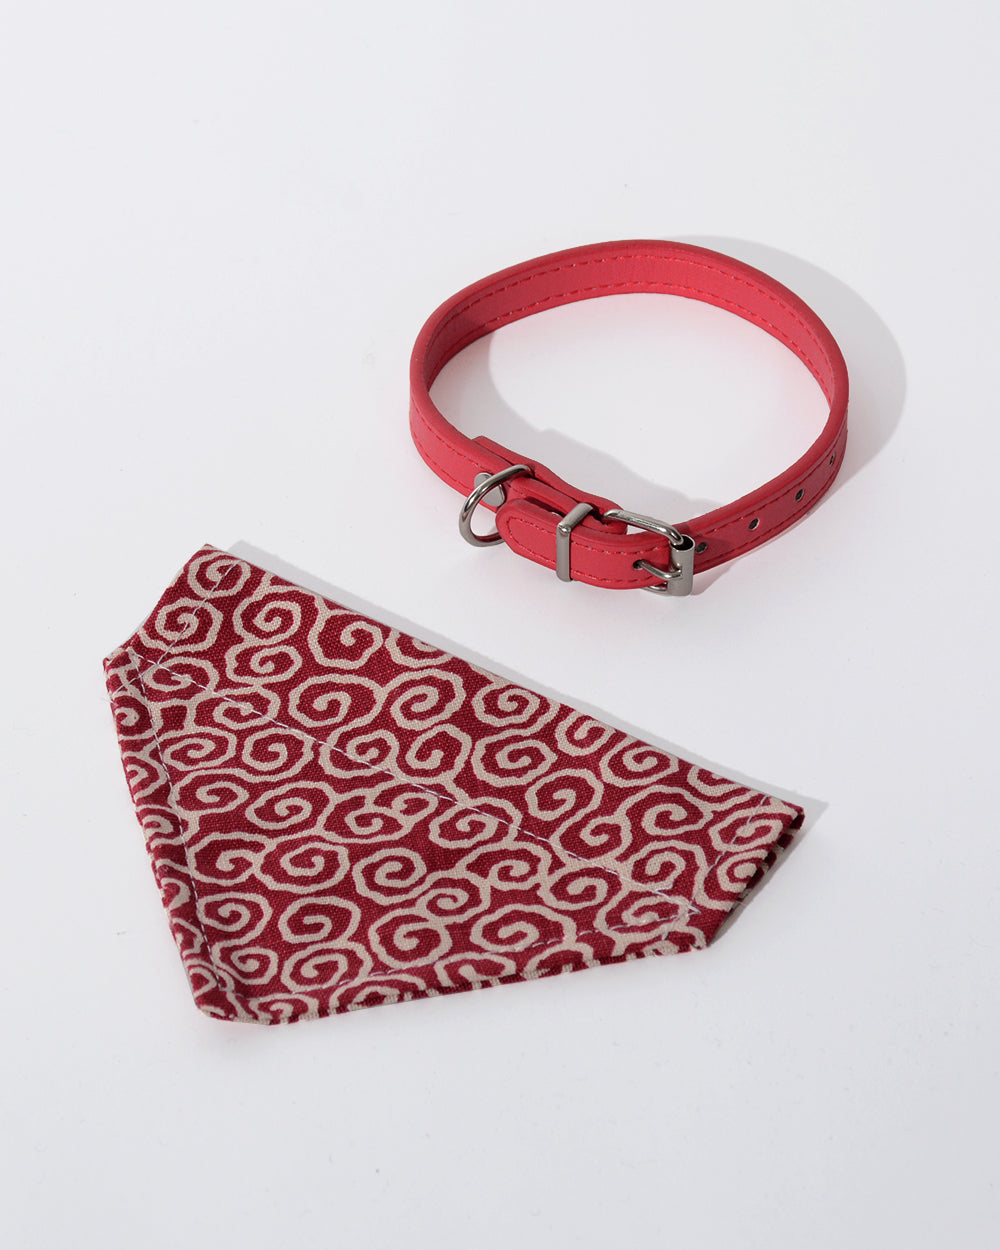 Reversible Dog Bandana with Collar - Red Mist